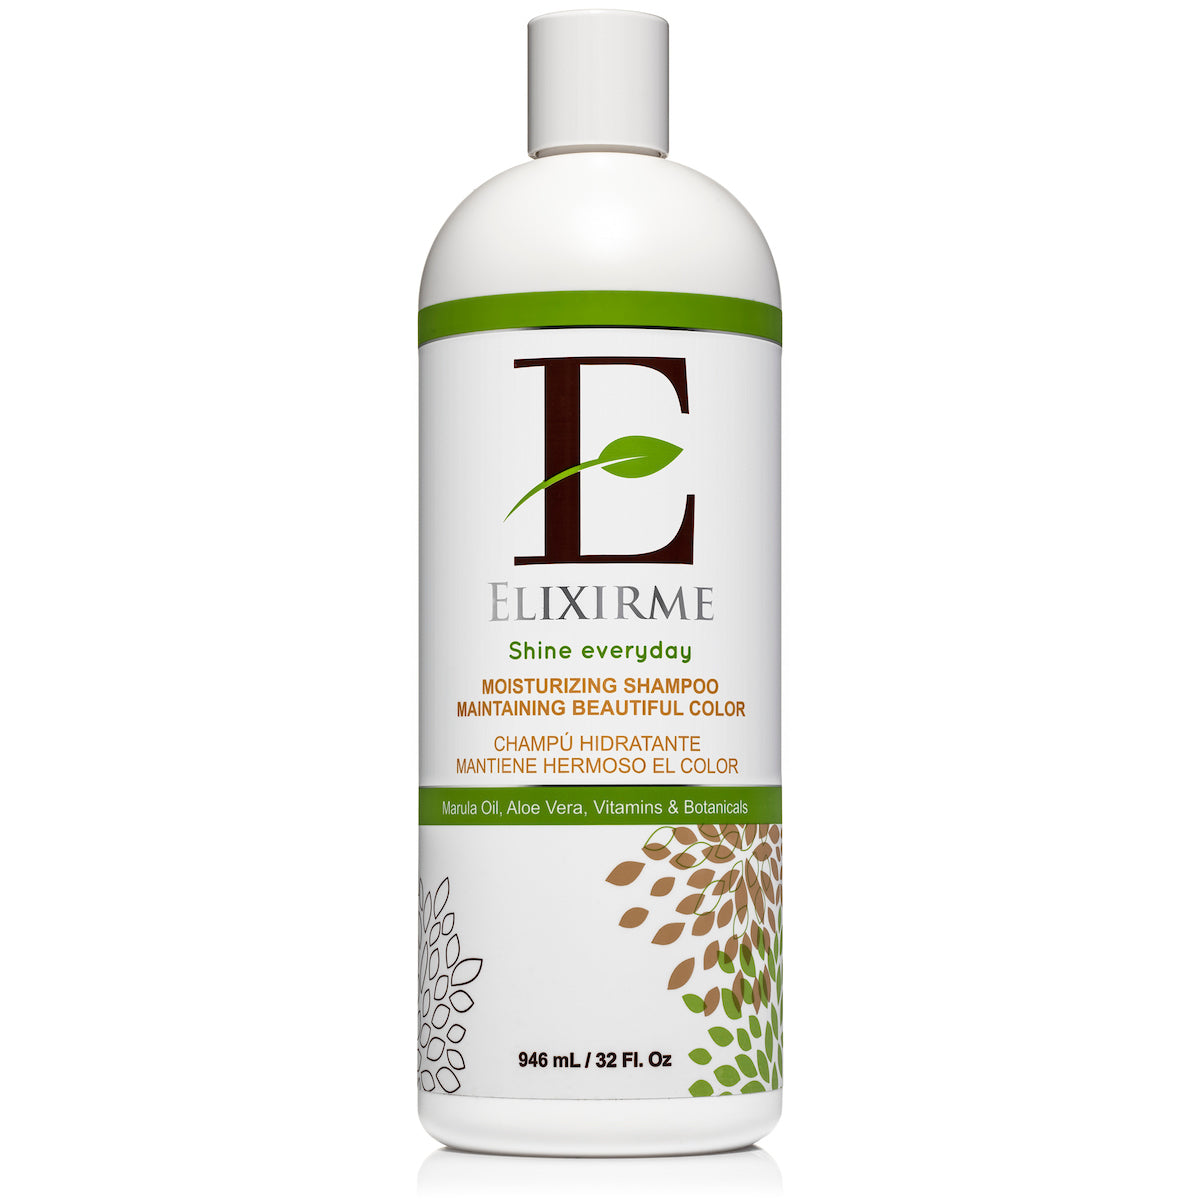 ElixirMe Moisture Repair Shampoo for Dry, Damaged Hair Sulfate-Free.